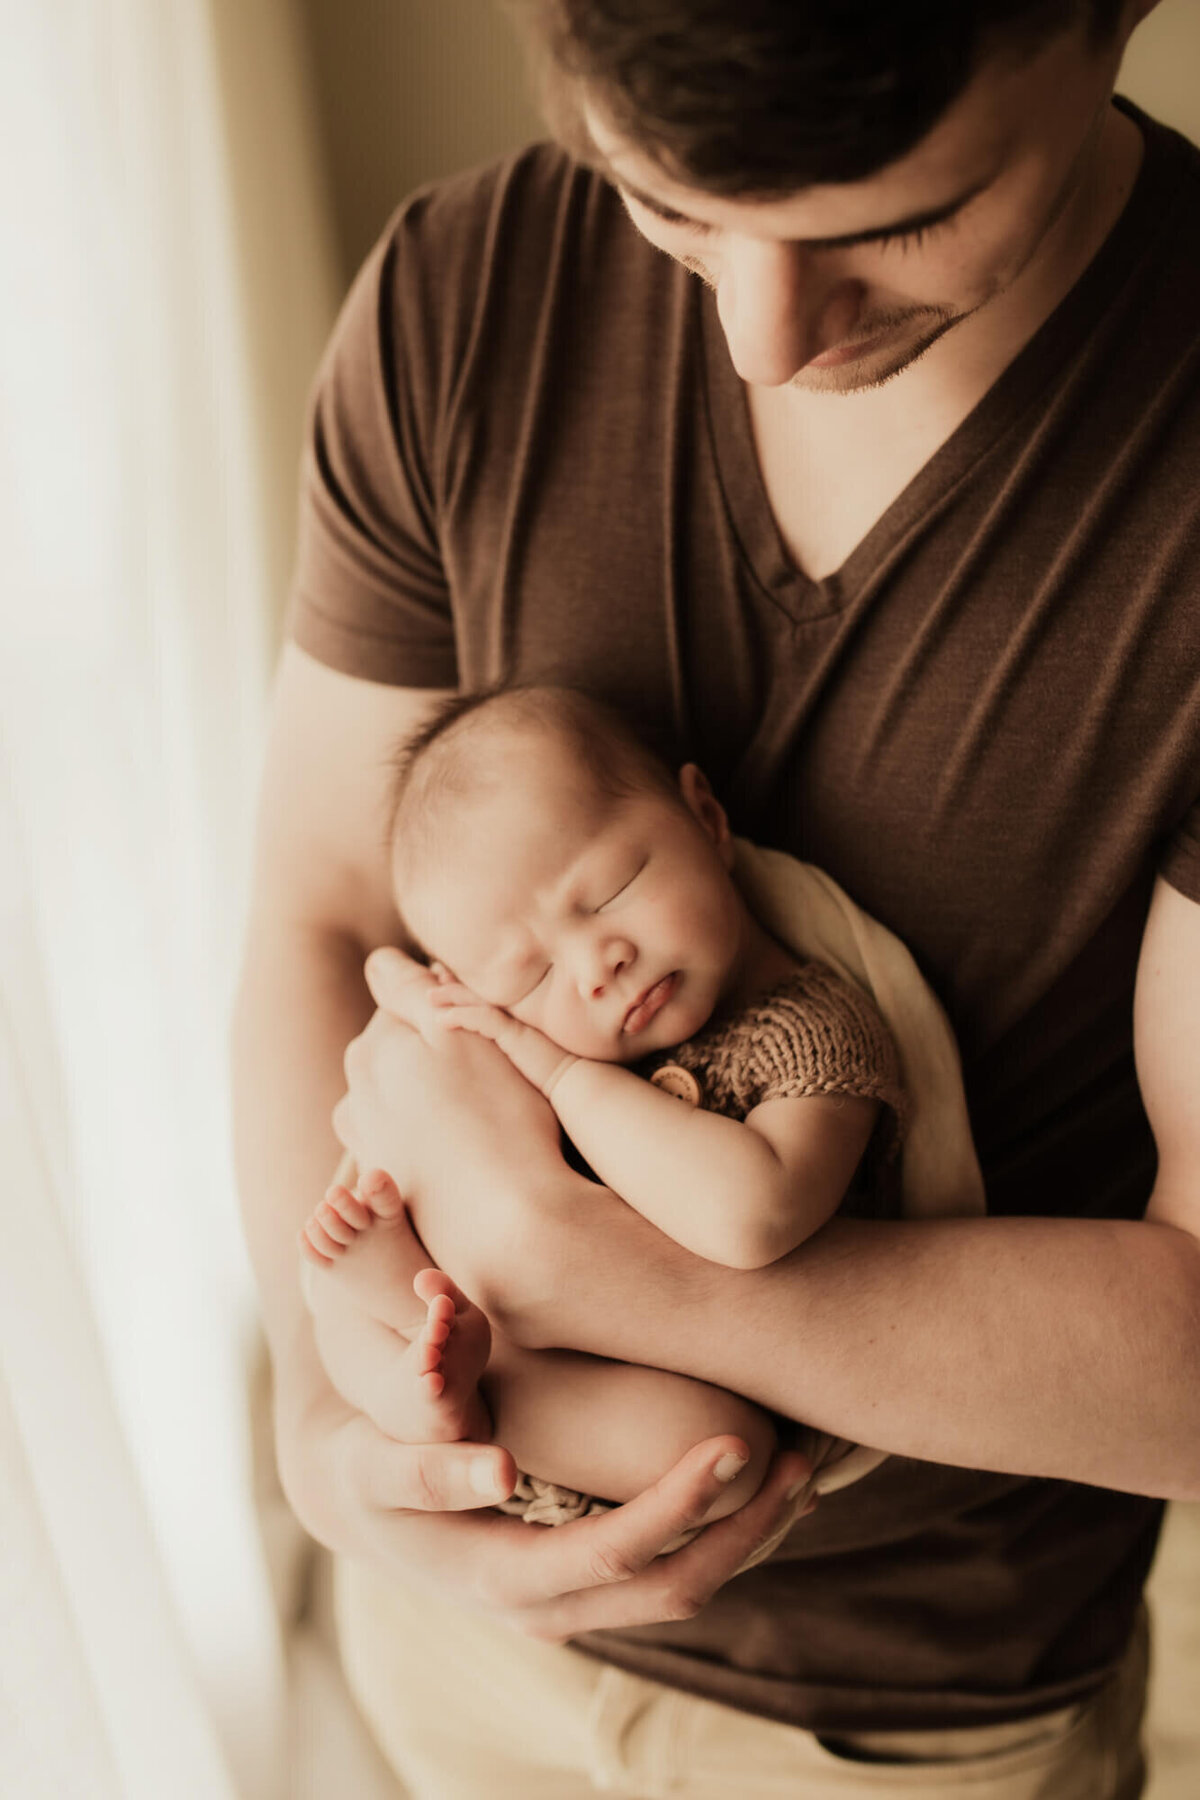 Father holds his newborn son in his arms as his baby sleeps.